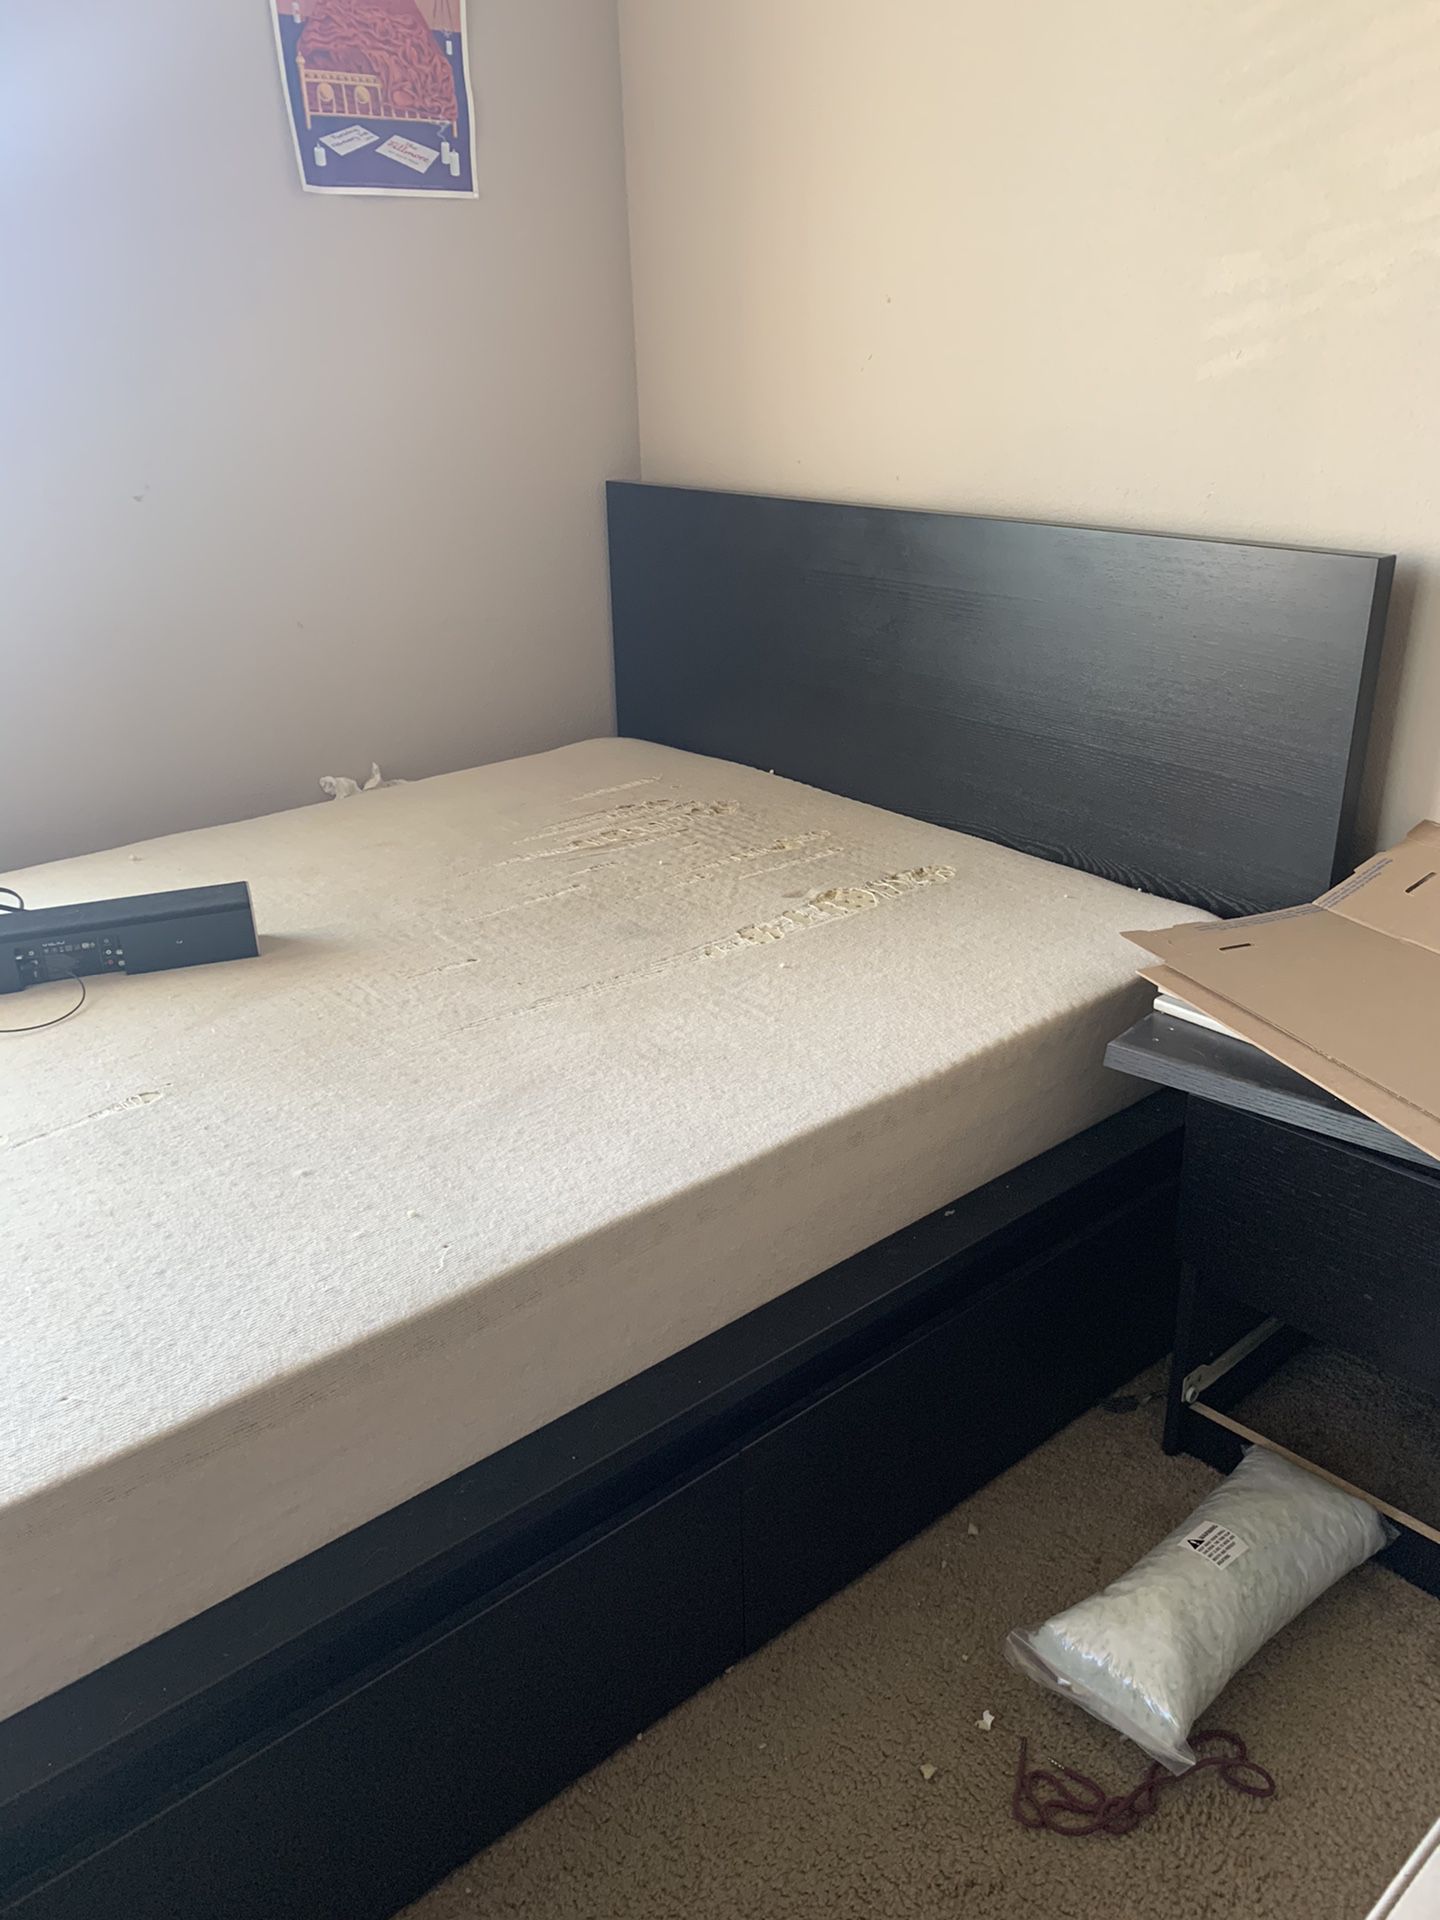 Free bed frame with drawers